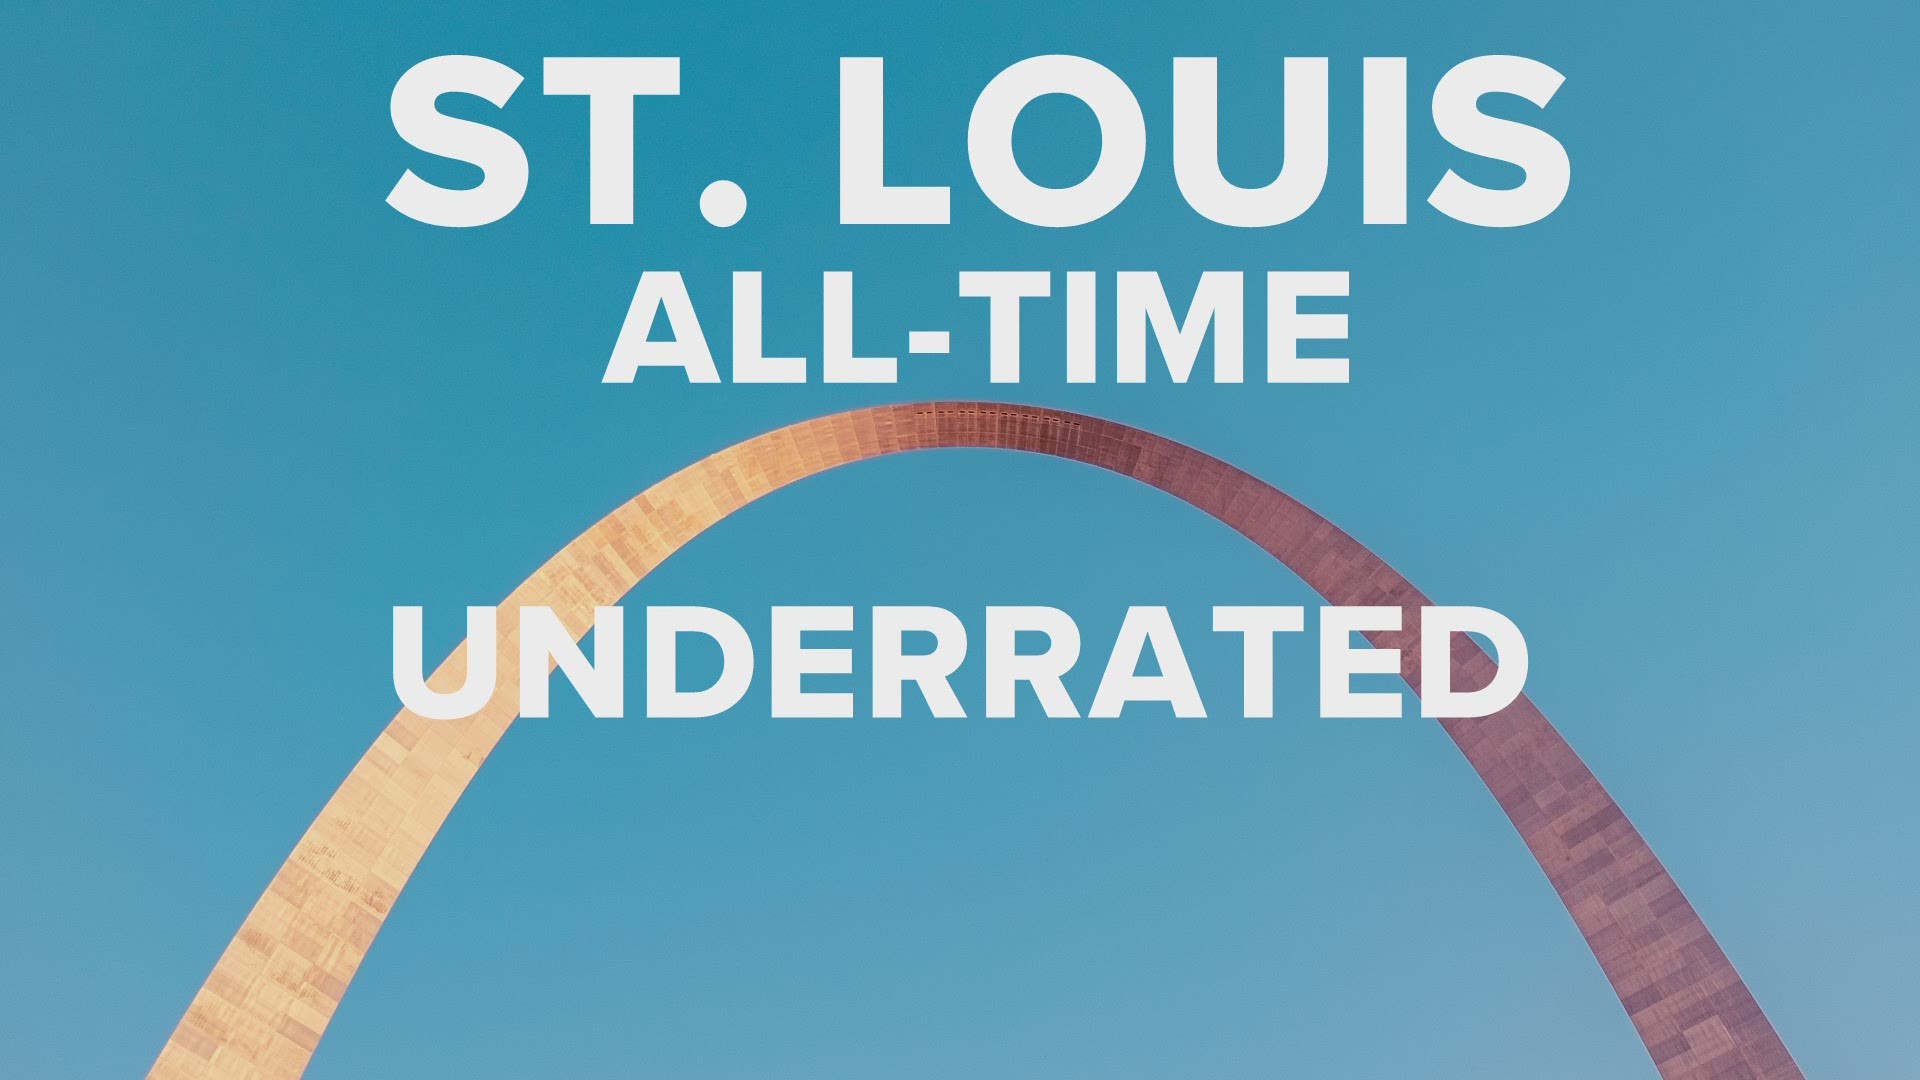 Our list of the most overlooked and underappreciated athletes that have played for St. Louis teams, or are from our town.